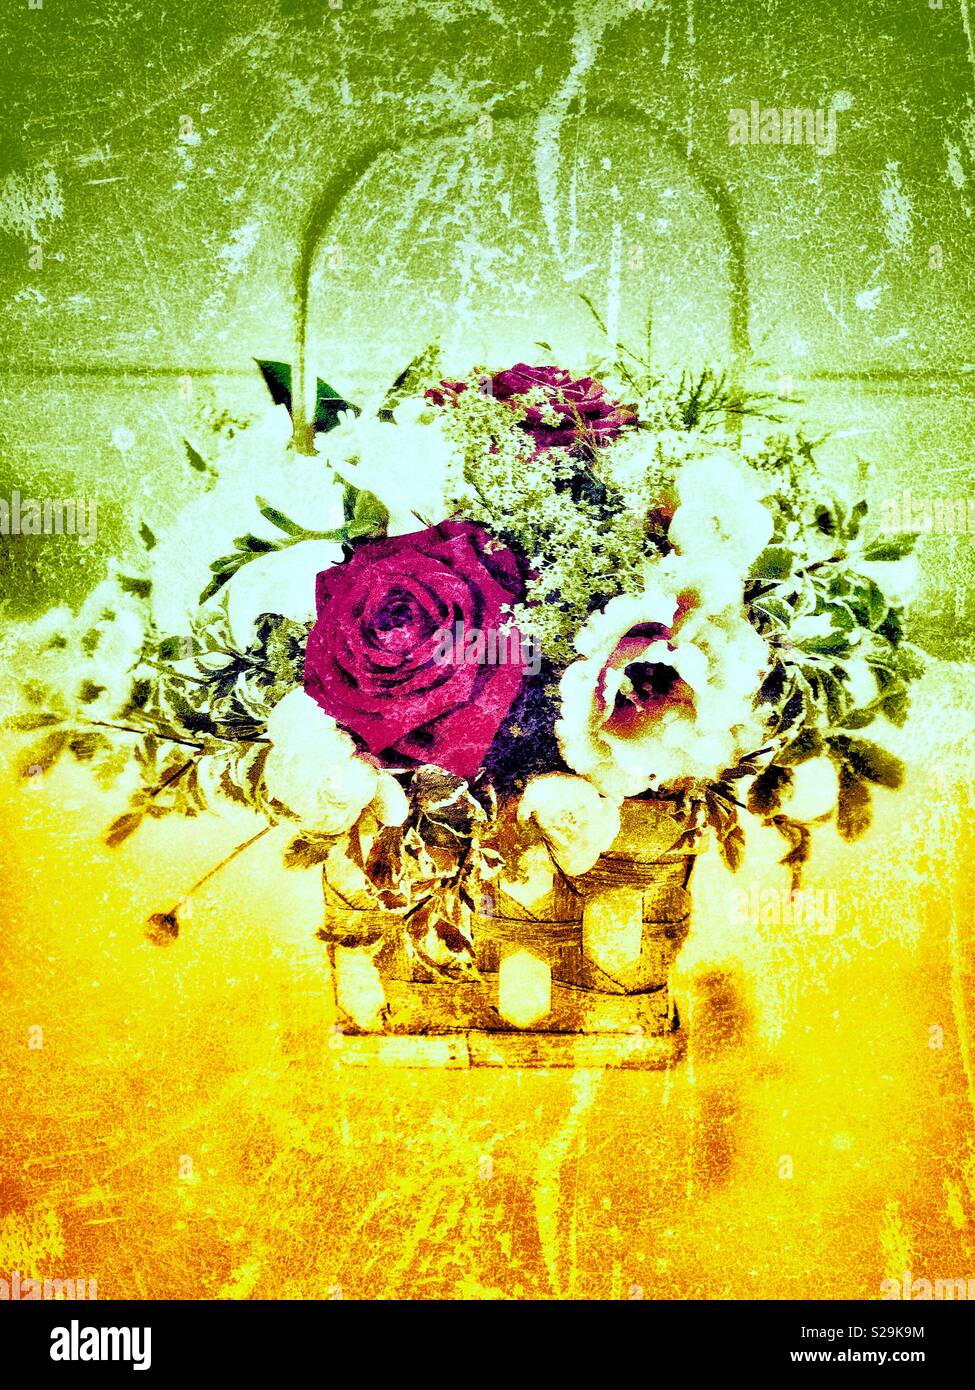 Basket of flowers, the image has been enhanced with a grunge effect’ using yellow and green shades Stock Photo